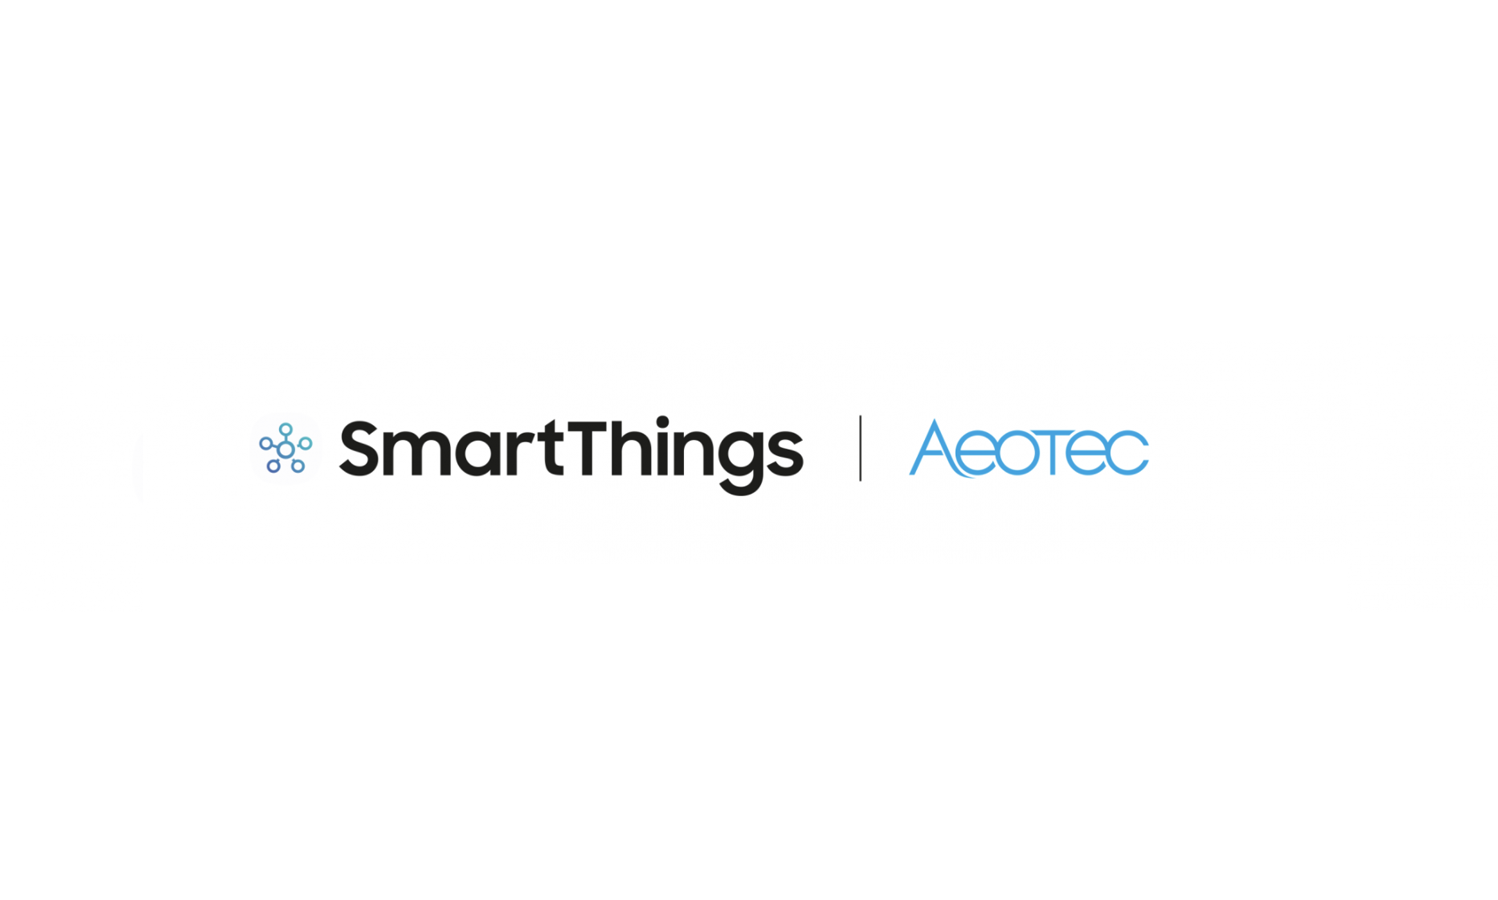 SmartThings and Aeotec – A Connected Family